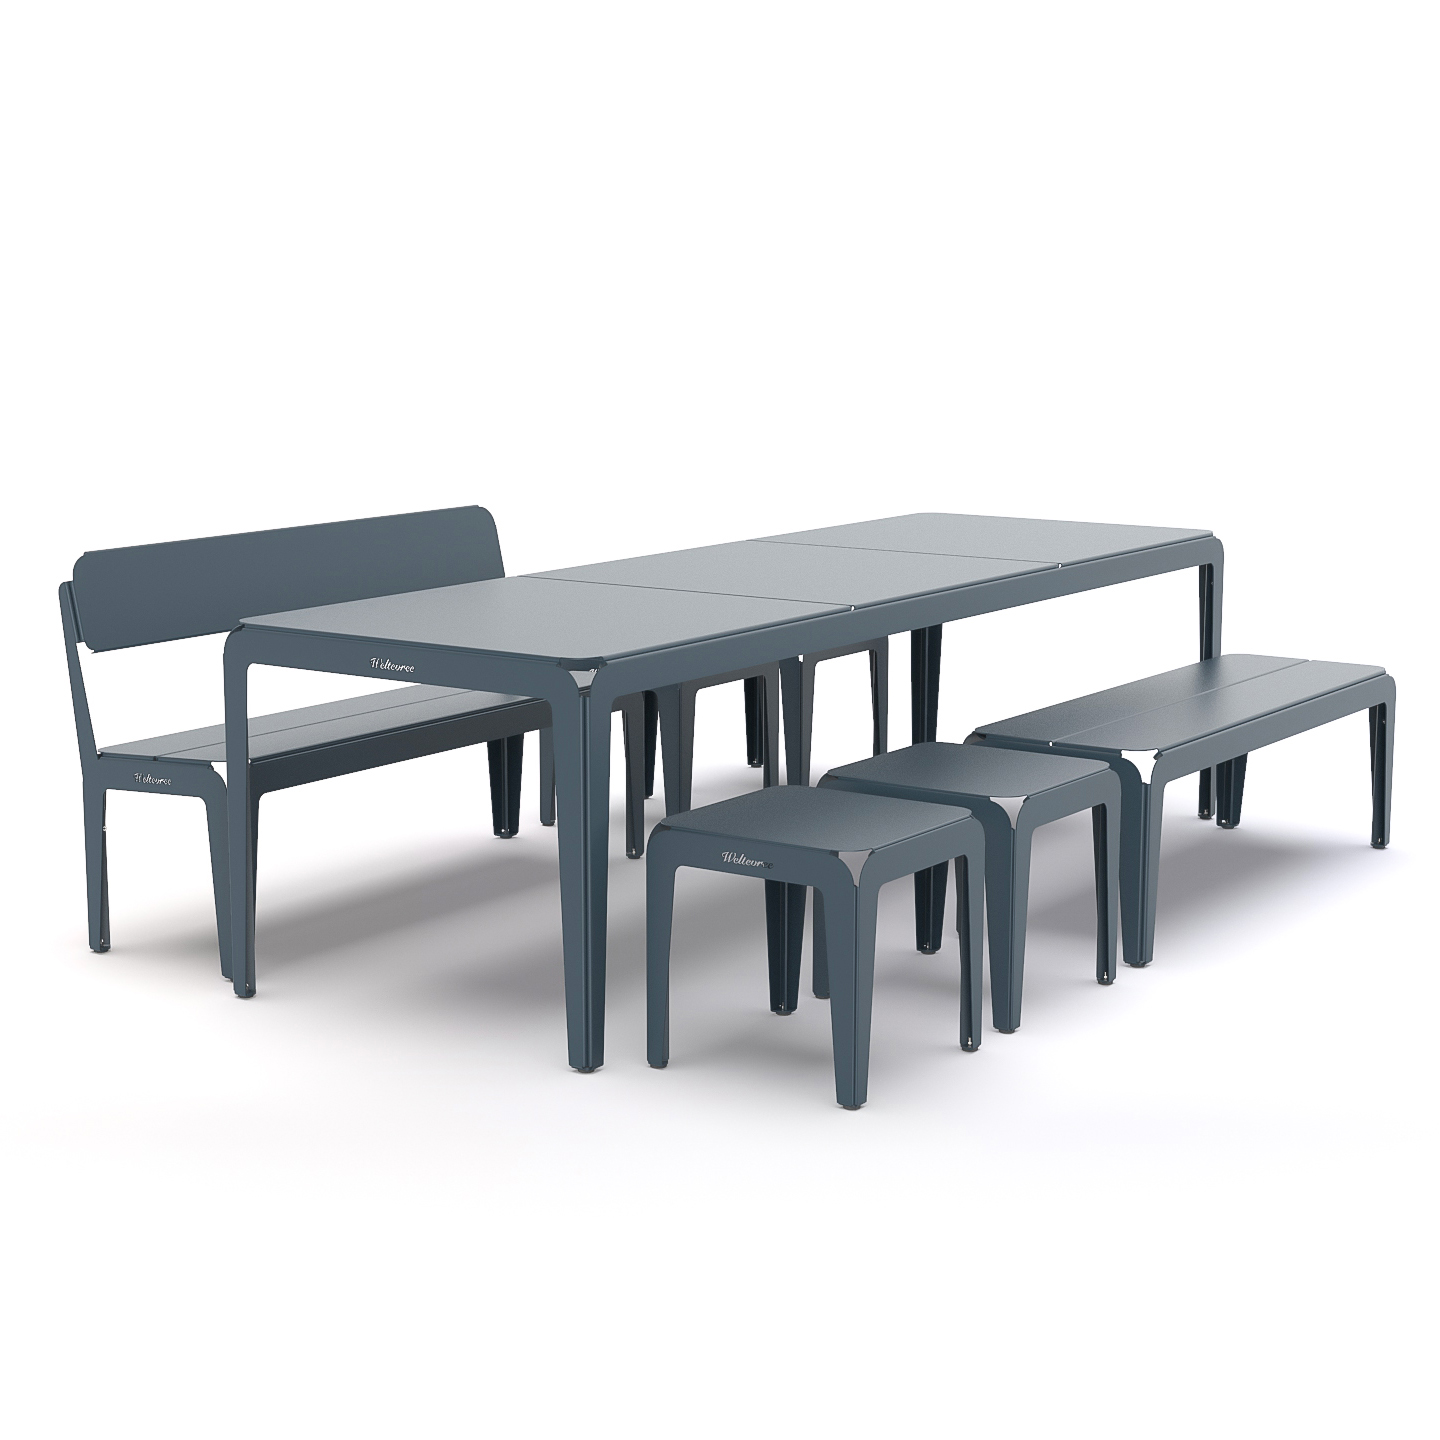 Weltevree-blauw-bended-bench-table-stool